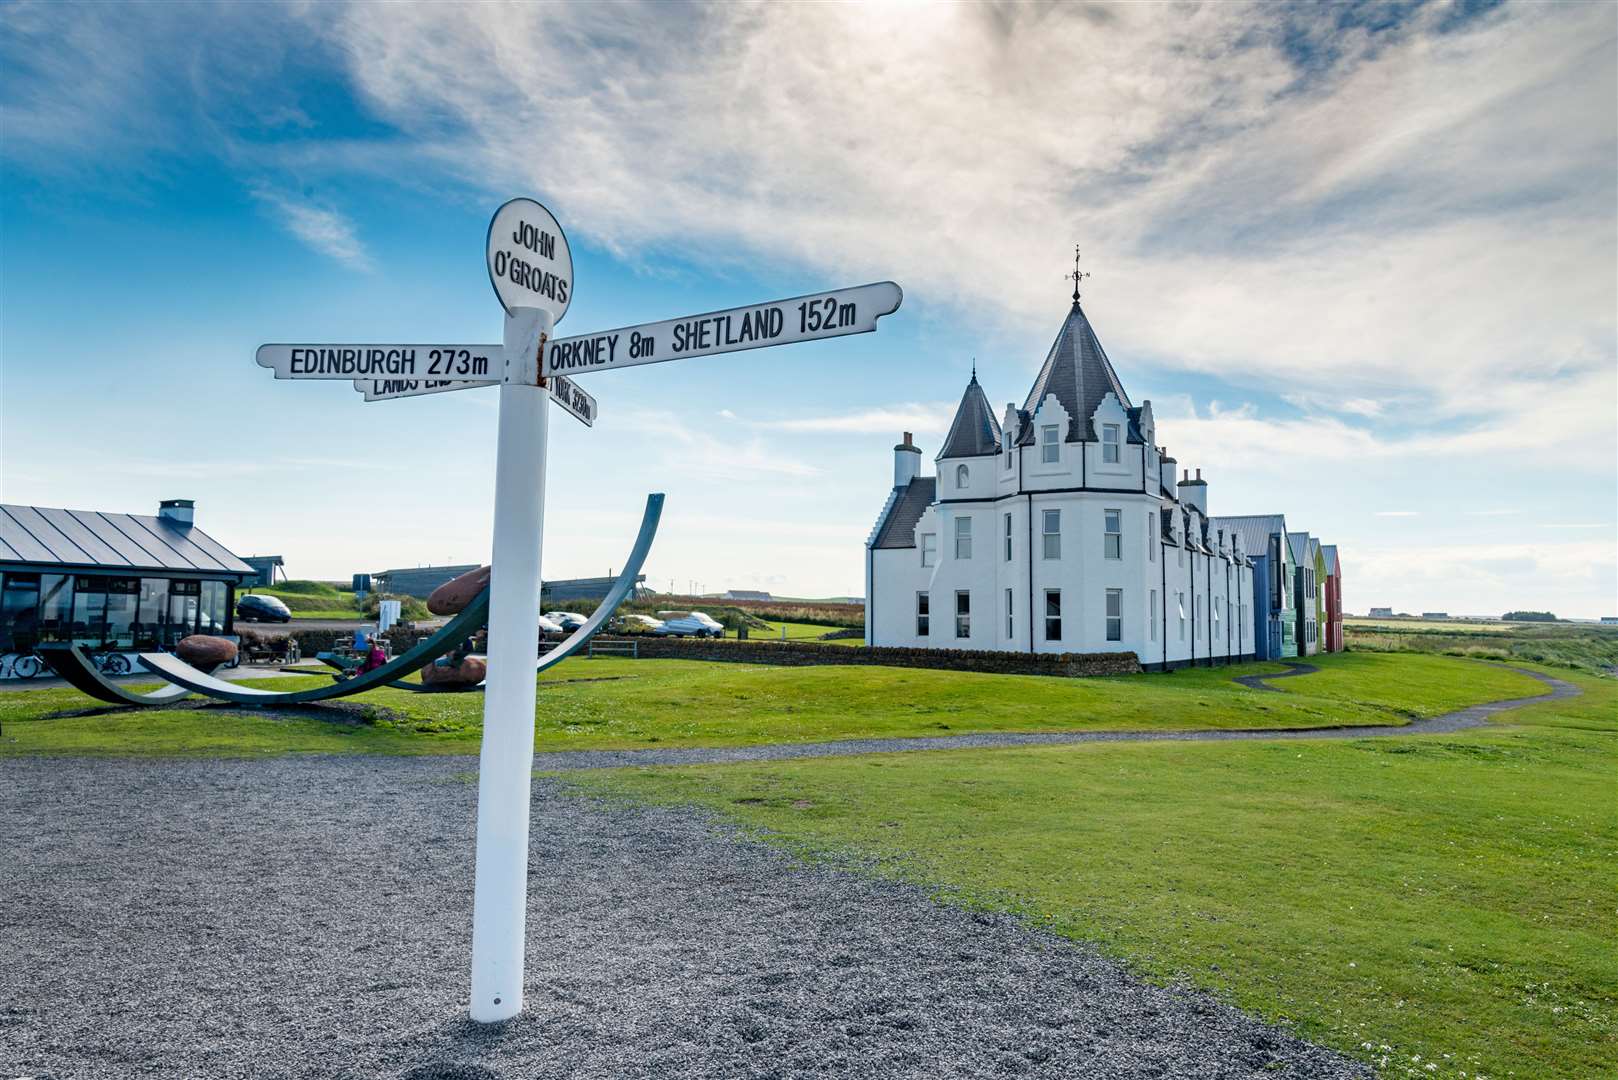 John O'Groats is a big tourist landmark in Caithness, but the county has no tourist information centres.